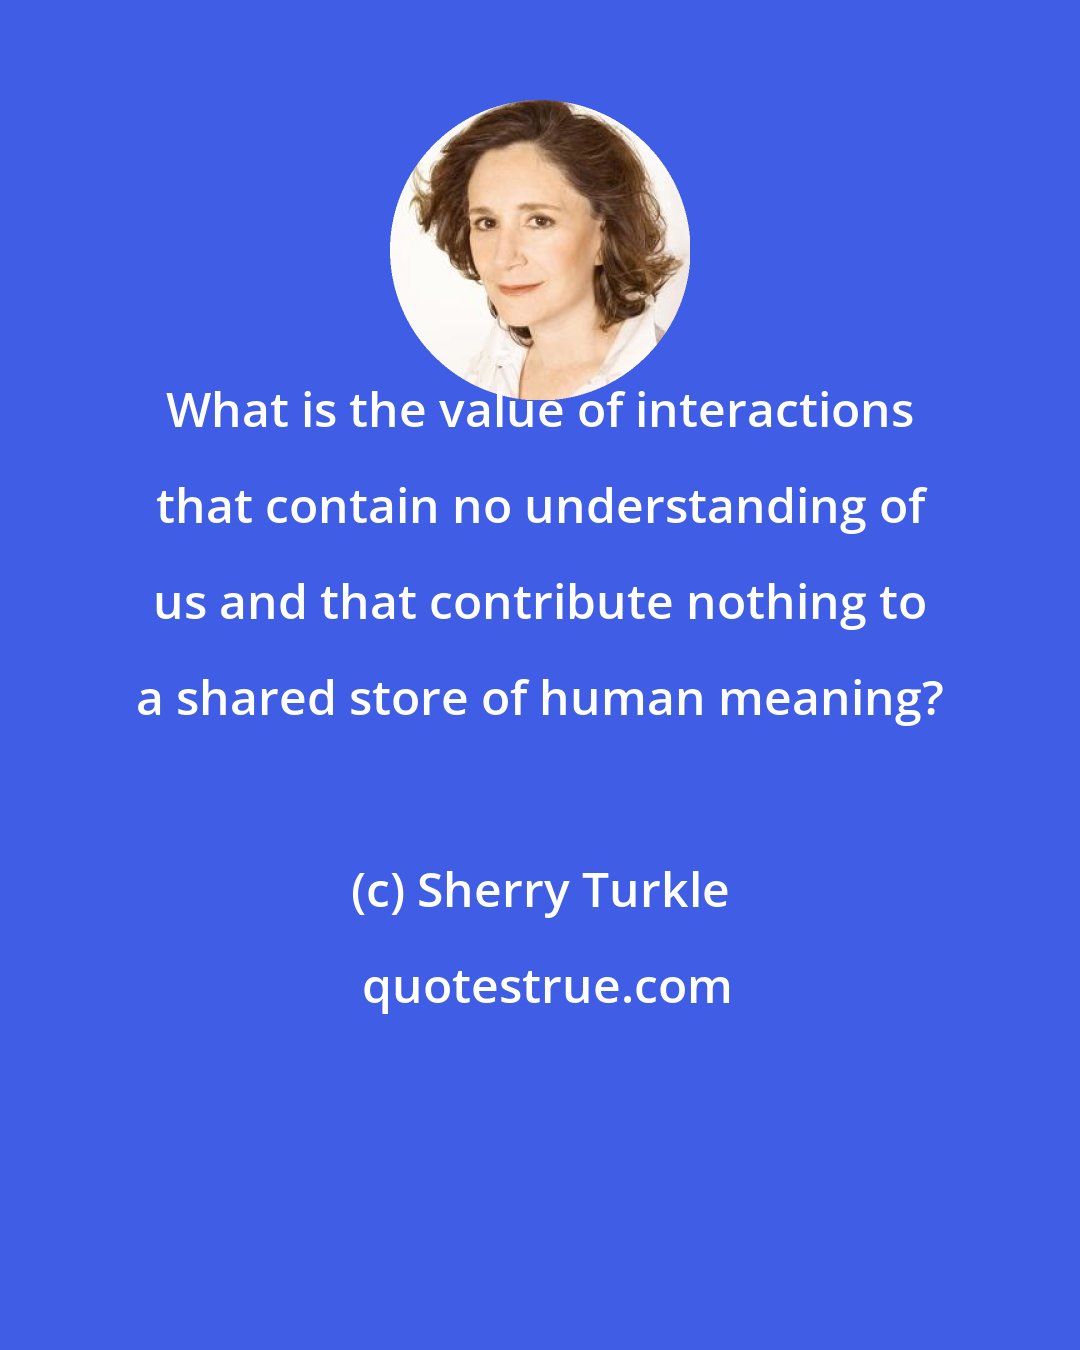 Sherry Turkle: What is the value of interactions that contain no understanding of us and that contribute nothing to a shared store of human meaning?